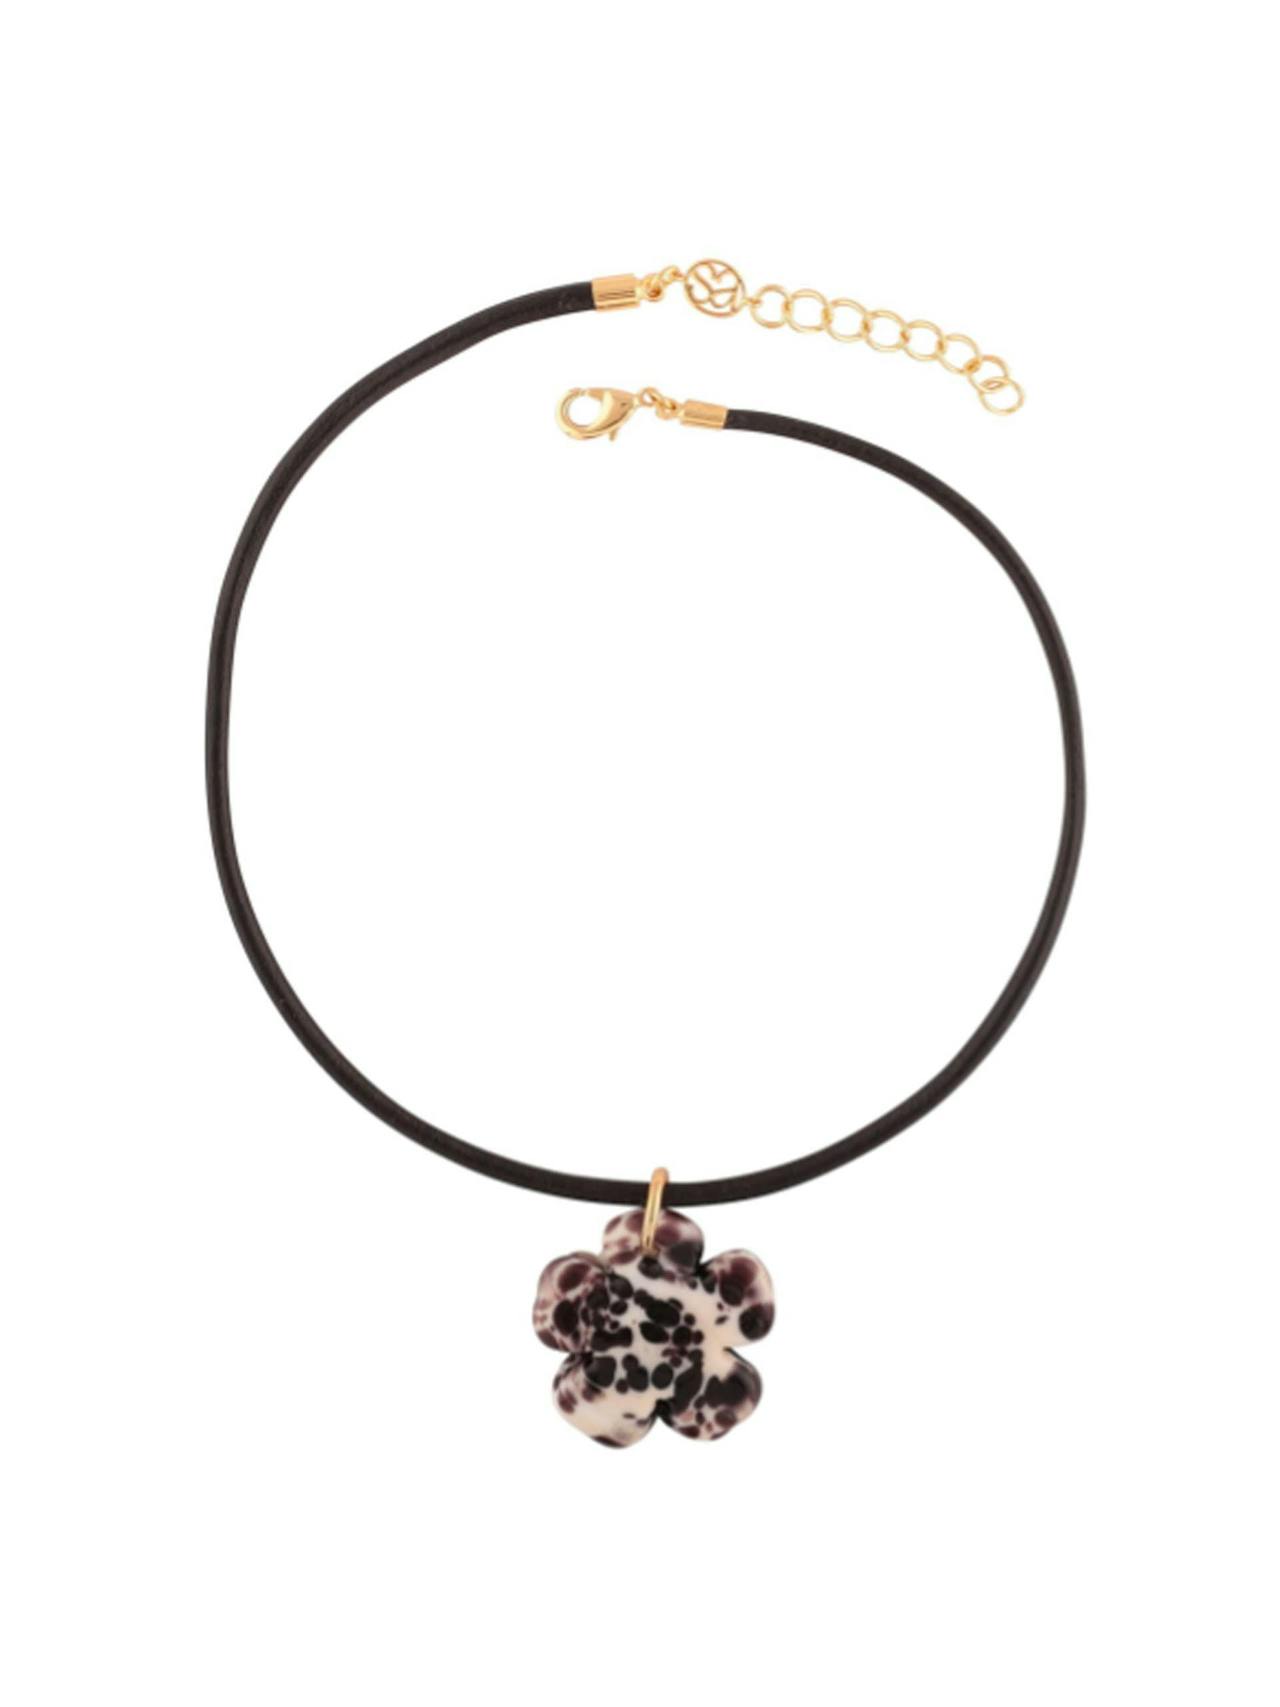 Black and white clover leather cord necklace